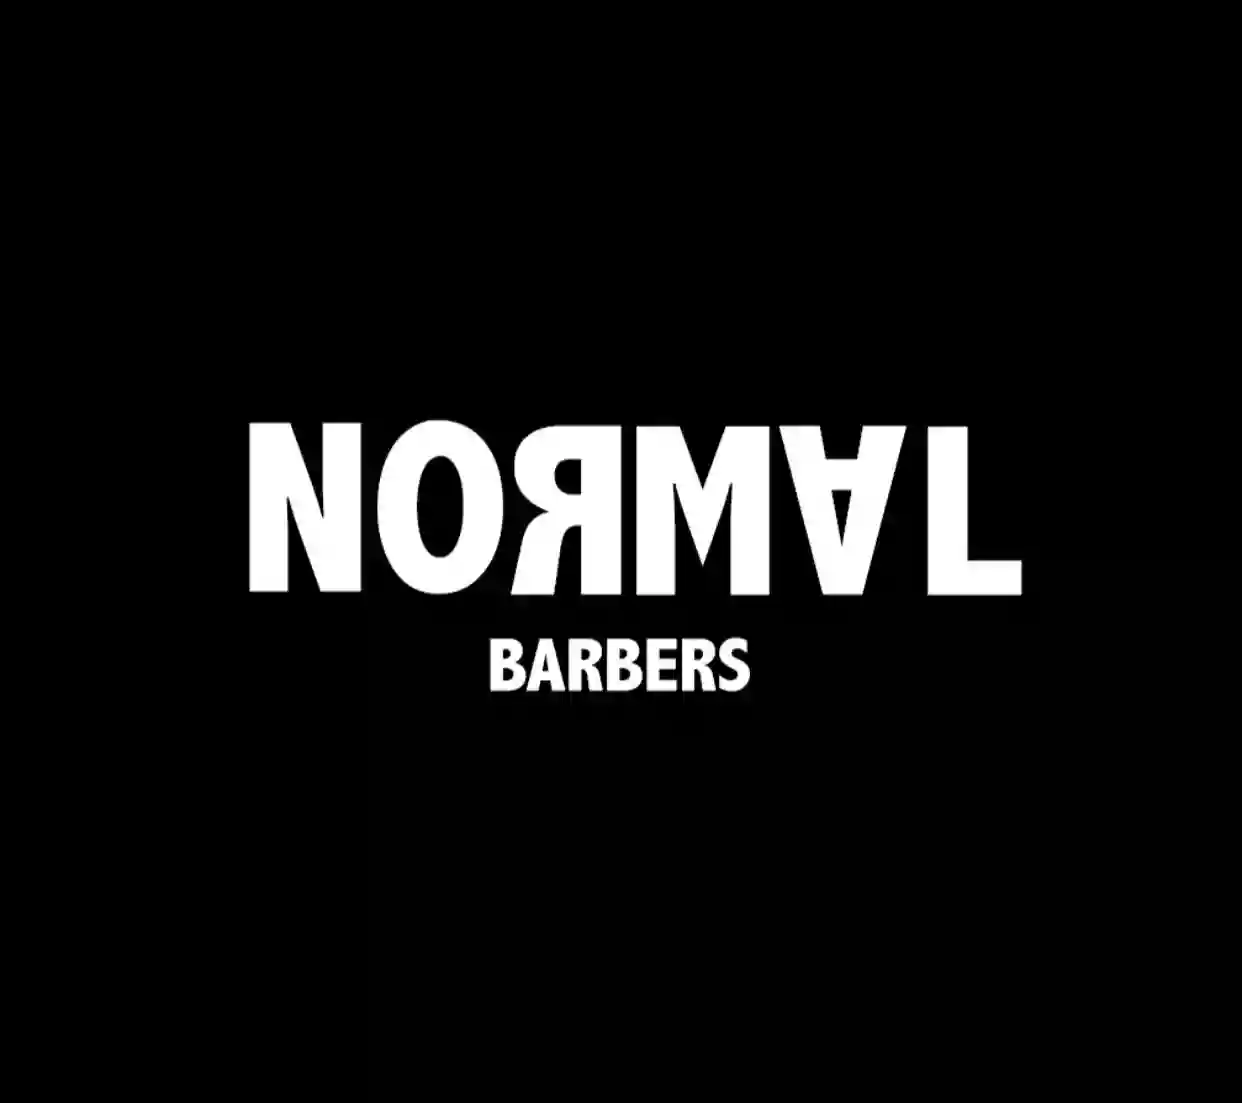 The Normal Barbers